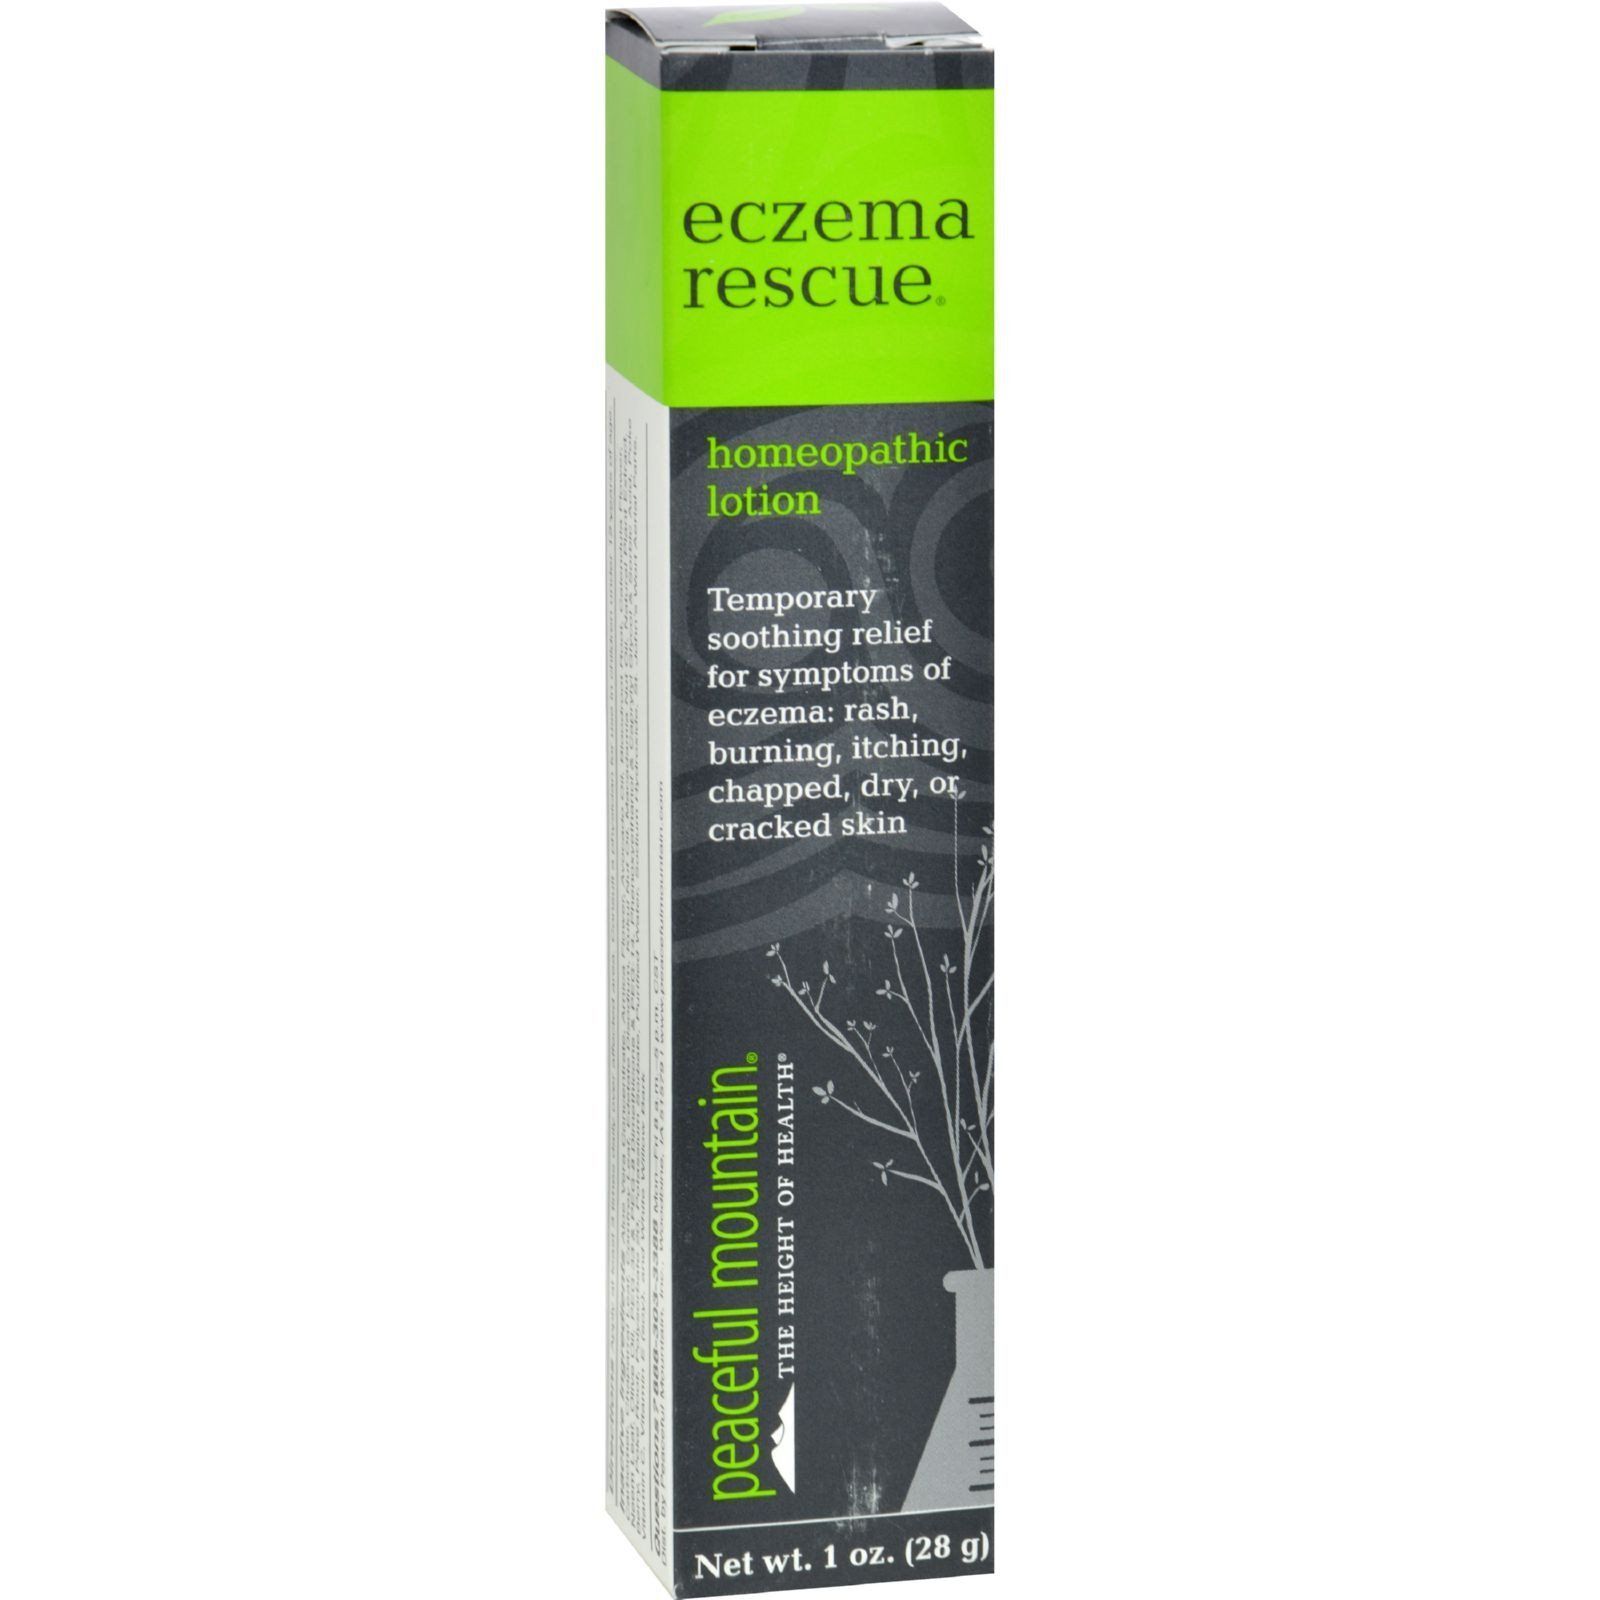 Peaceful Mountain Eczema Rescue Homeopathic Lotion